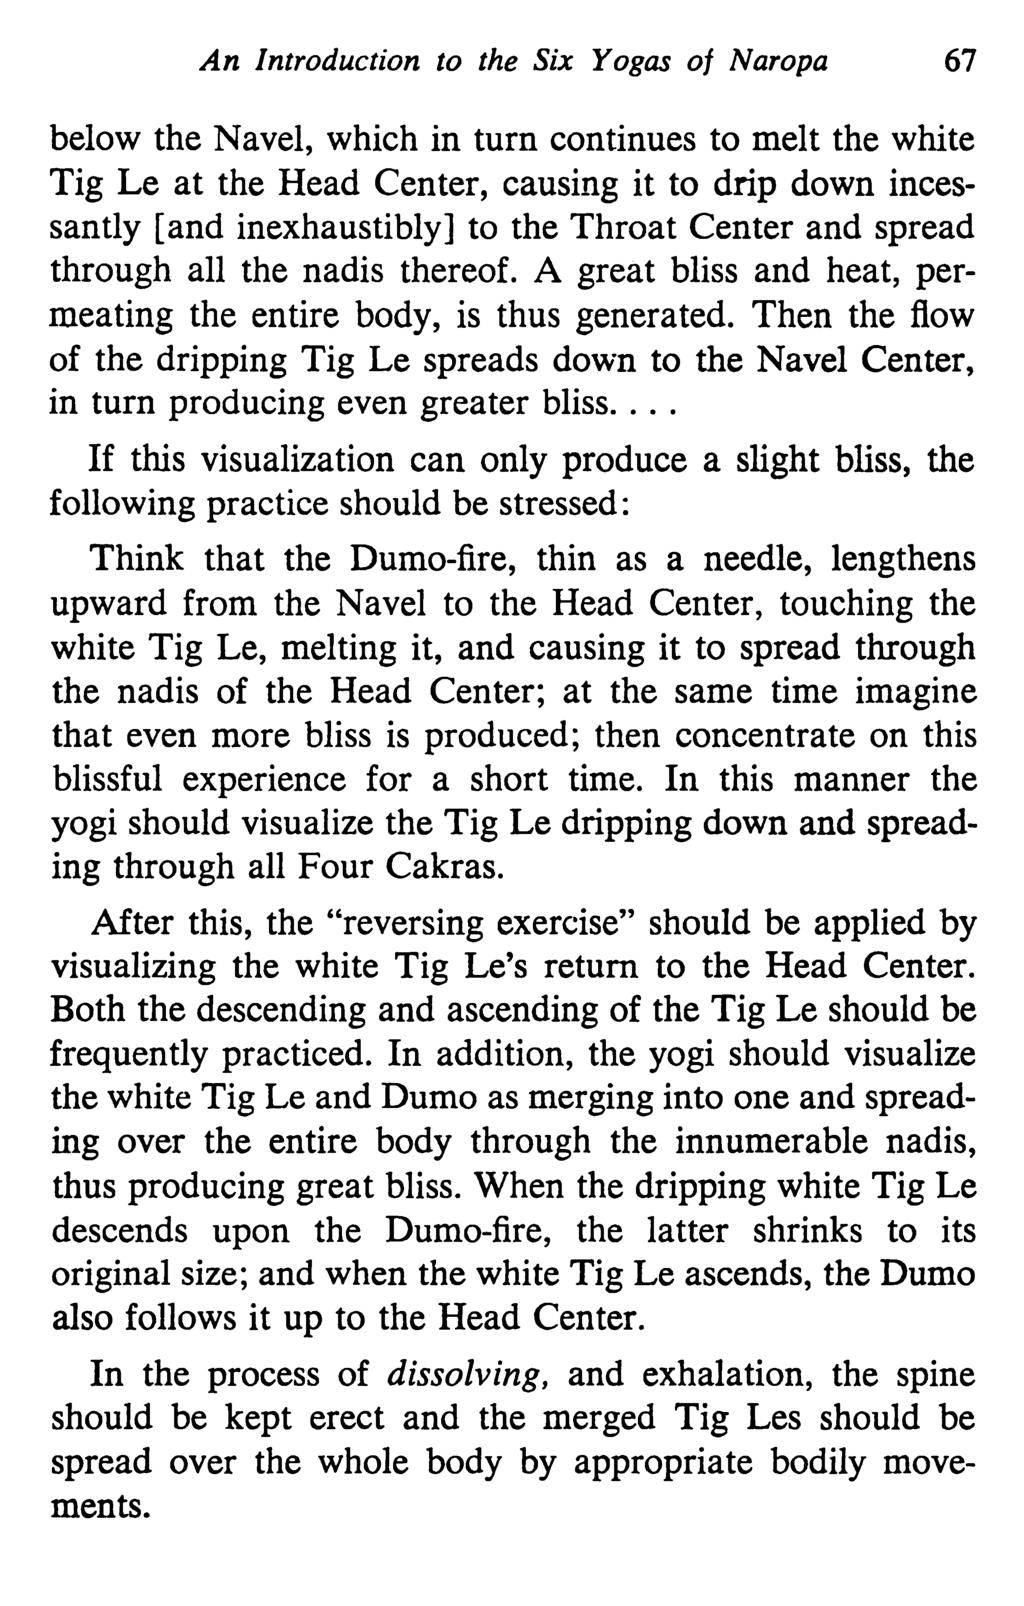 An Introduction to the Six Yogas of Naropa 67 below the Navel, which in turn continues to melt the white Tig Le at the Head Center, causing it to drip down incessantly [and inexhaustibly] to the